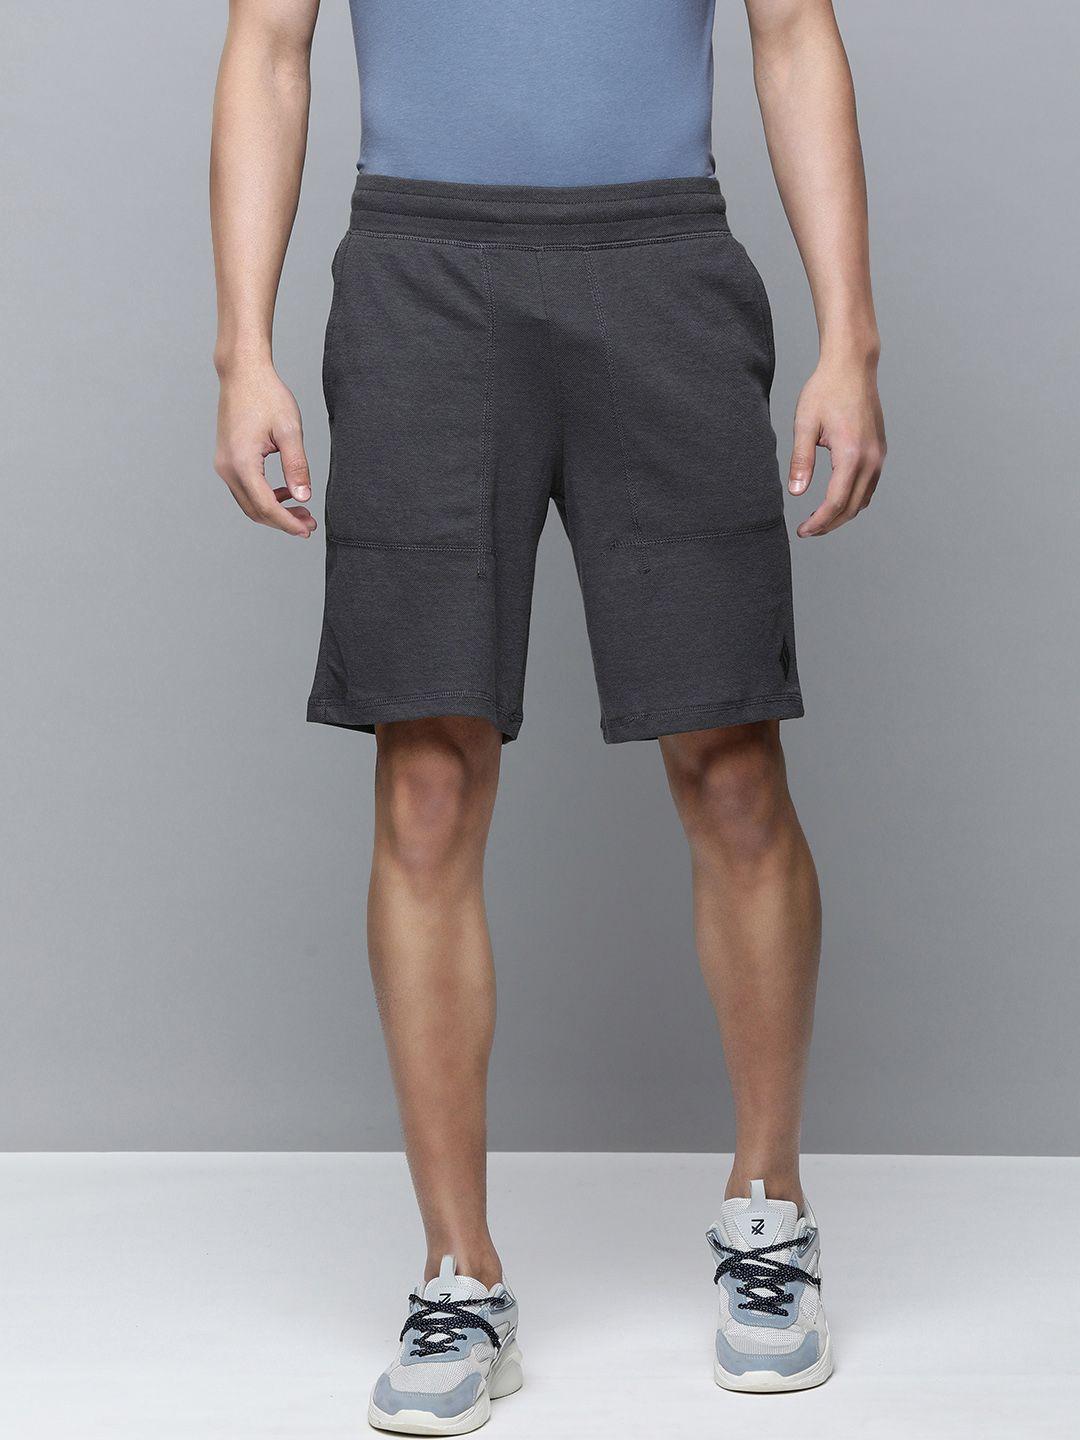 skechers men charcoal black solid sports shorts with e-dry technology technology